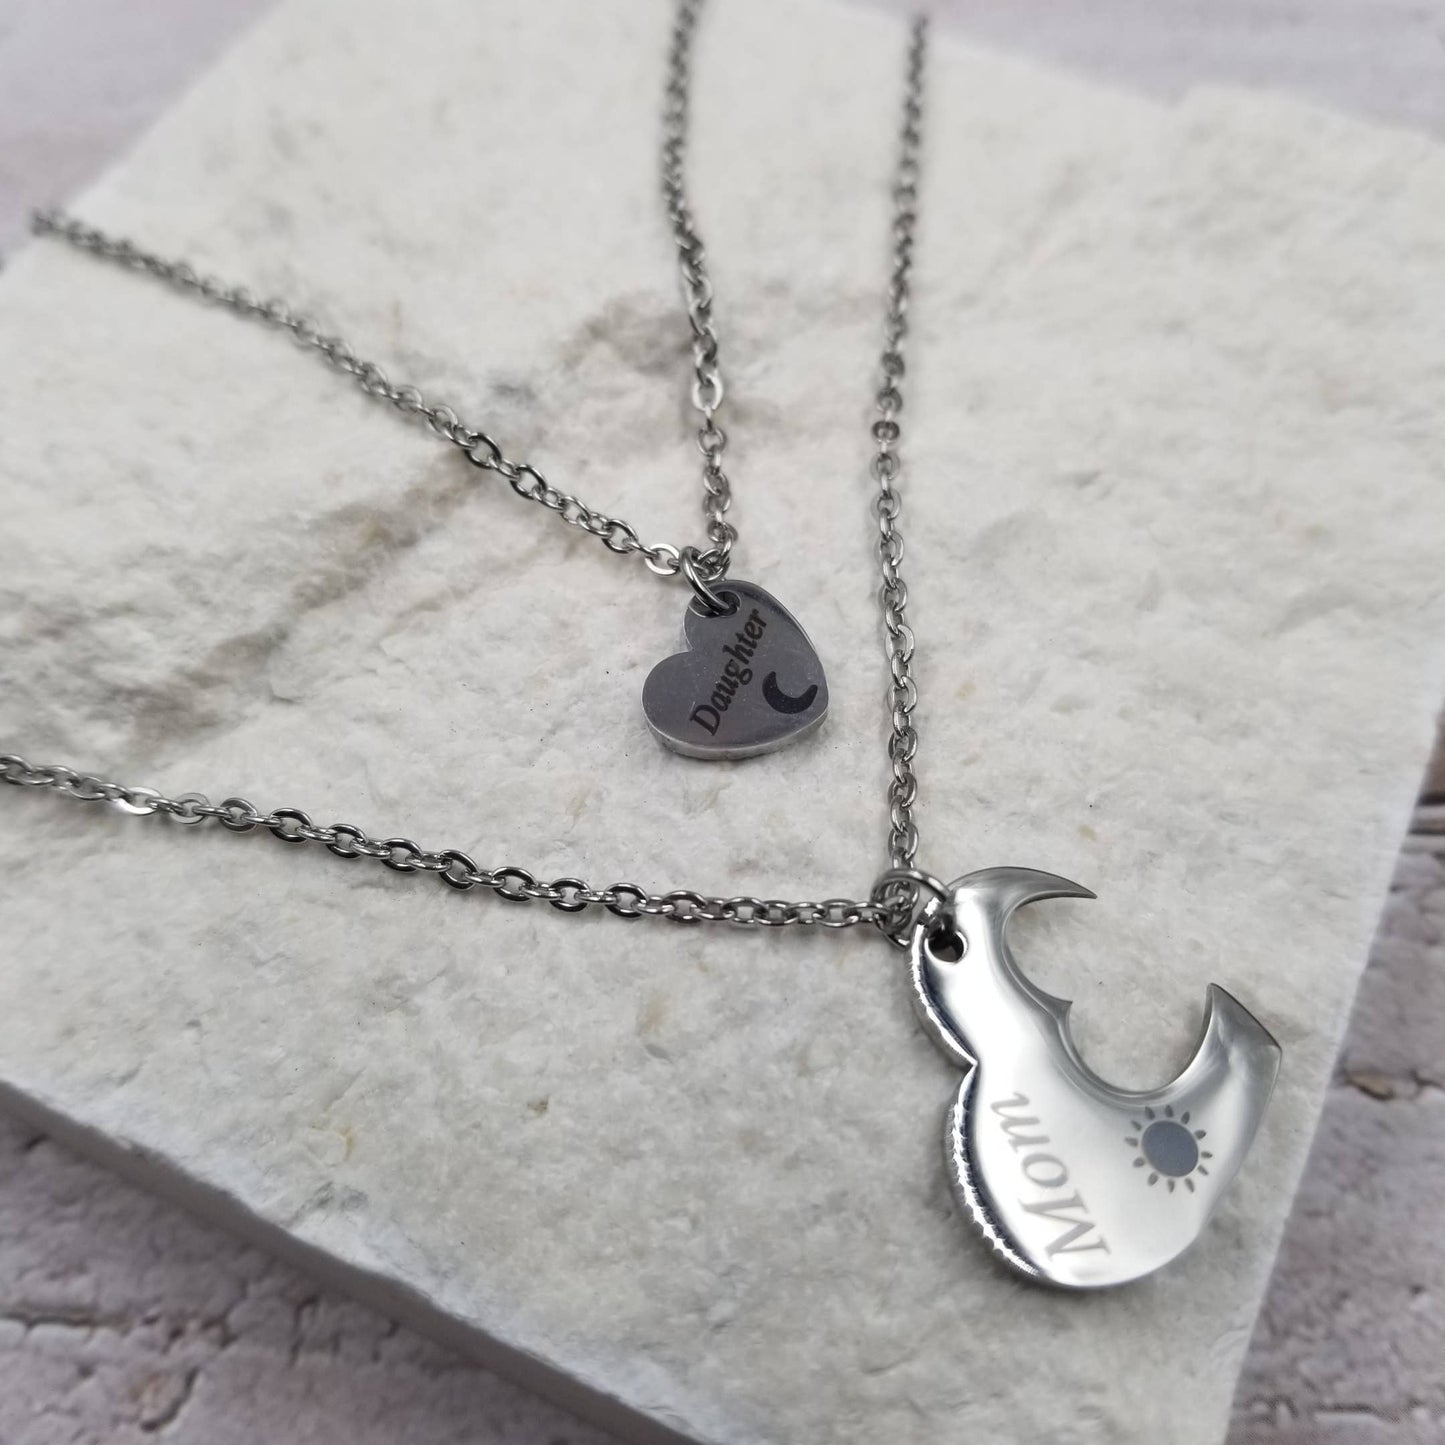 Sun & Moon Heart Necklace Set - Mother's Day Gift